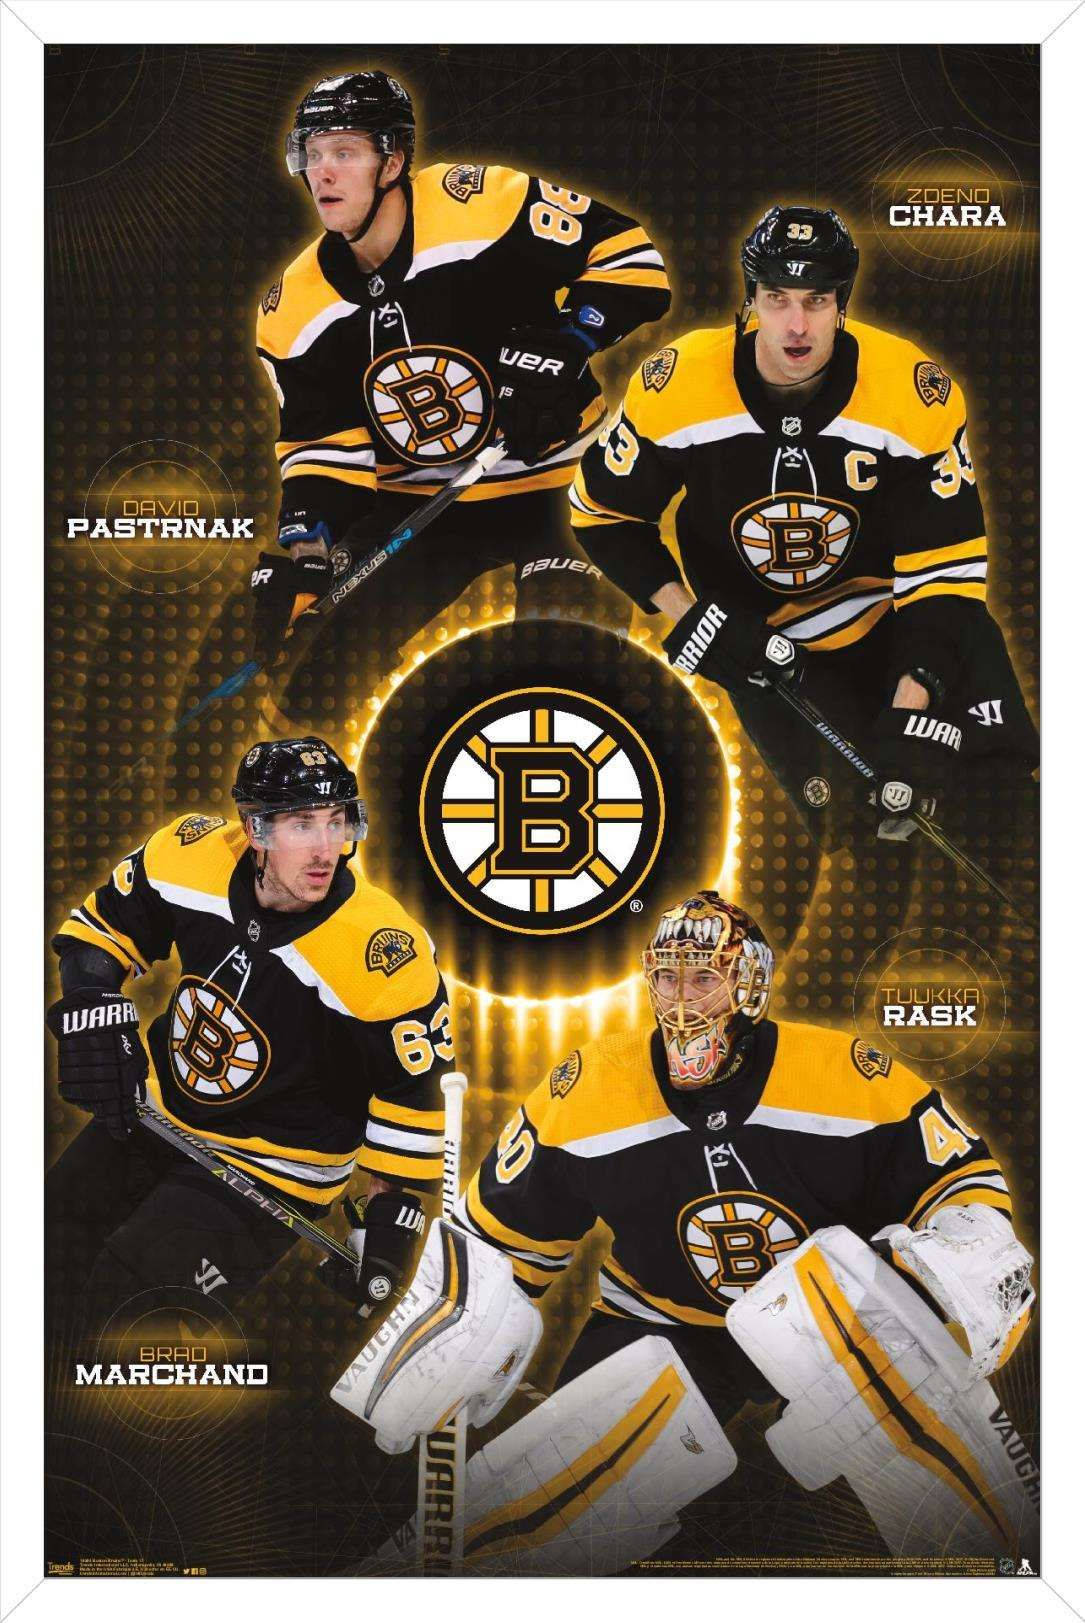 Exclusive Portrait Of Brad Marchand With His Boston Bruins Teammates. Background